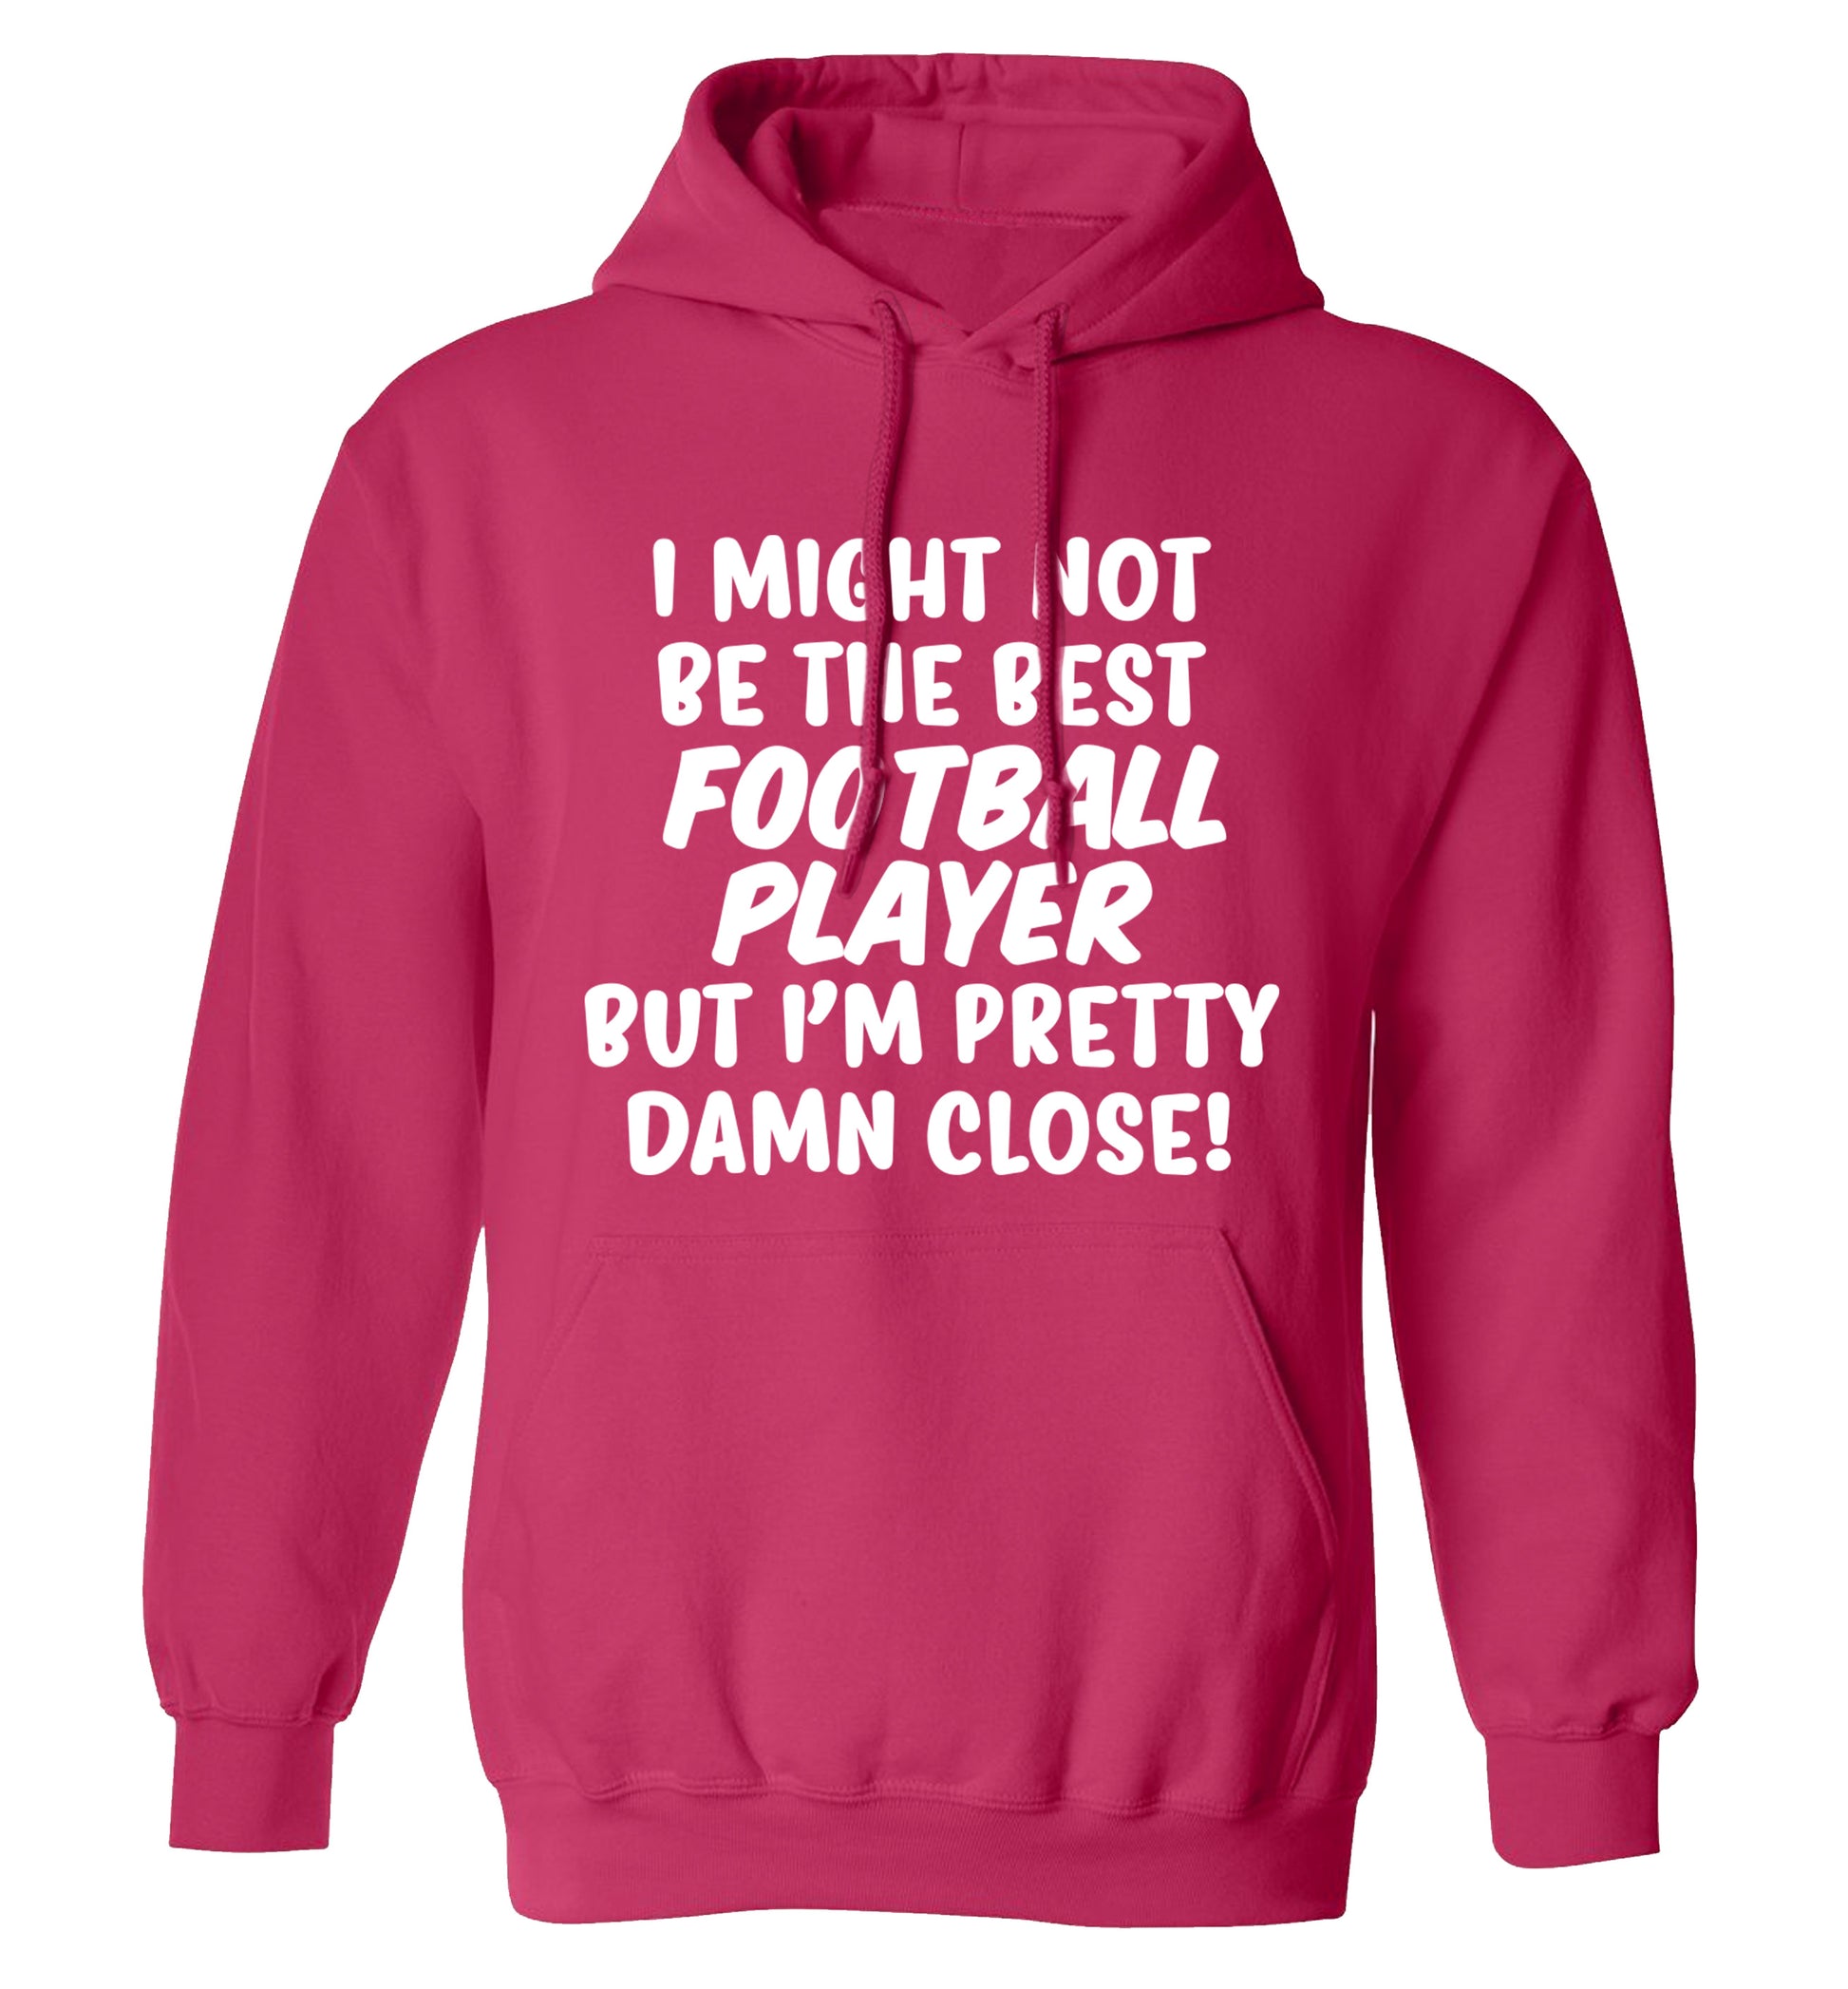 I might not be the best football player but I'm pretty close! adults unisexpink hoodie 2XL